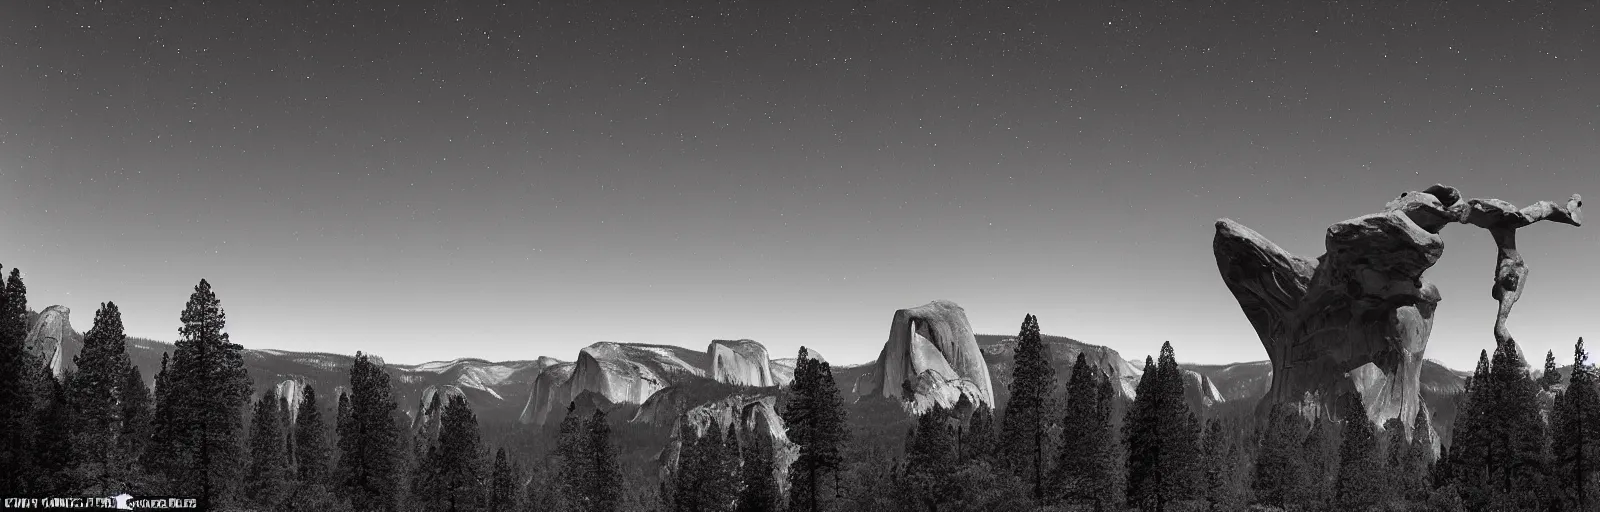 Image similar to to fathom hell or soar angelic, just take a pinch of psychedelic, medium format photograph of two colossal minimalistic necktie sculpture installations by antony gormley and anthony caro in yosemite national park, made from iron, marble, and limestone, granite peaks visible in the background, taken in the night